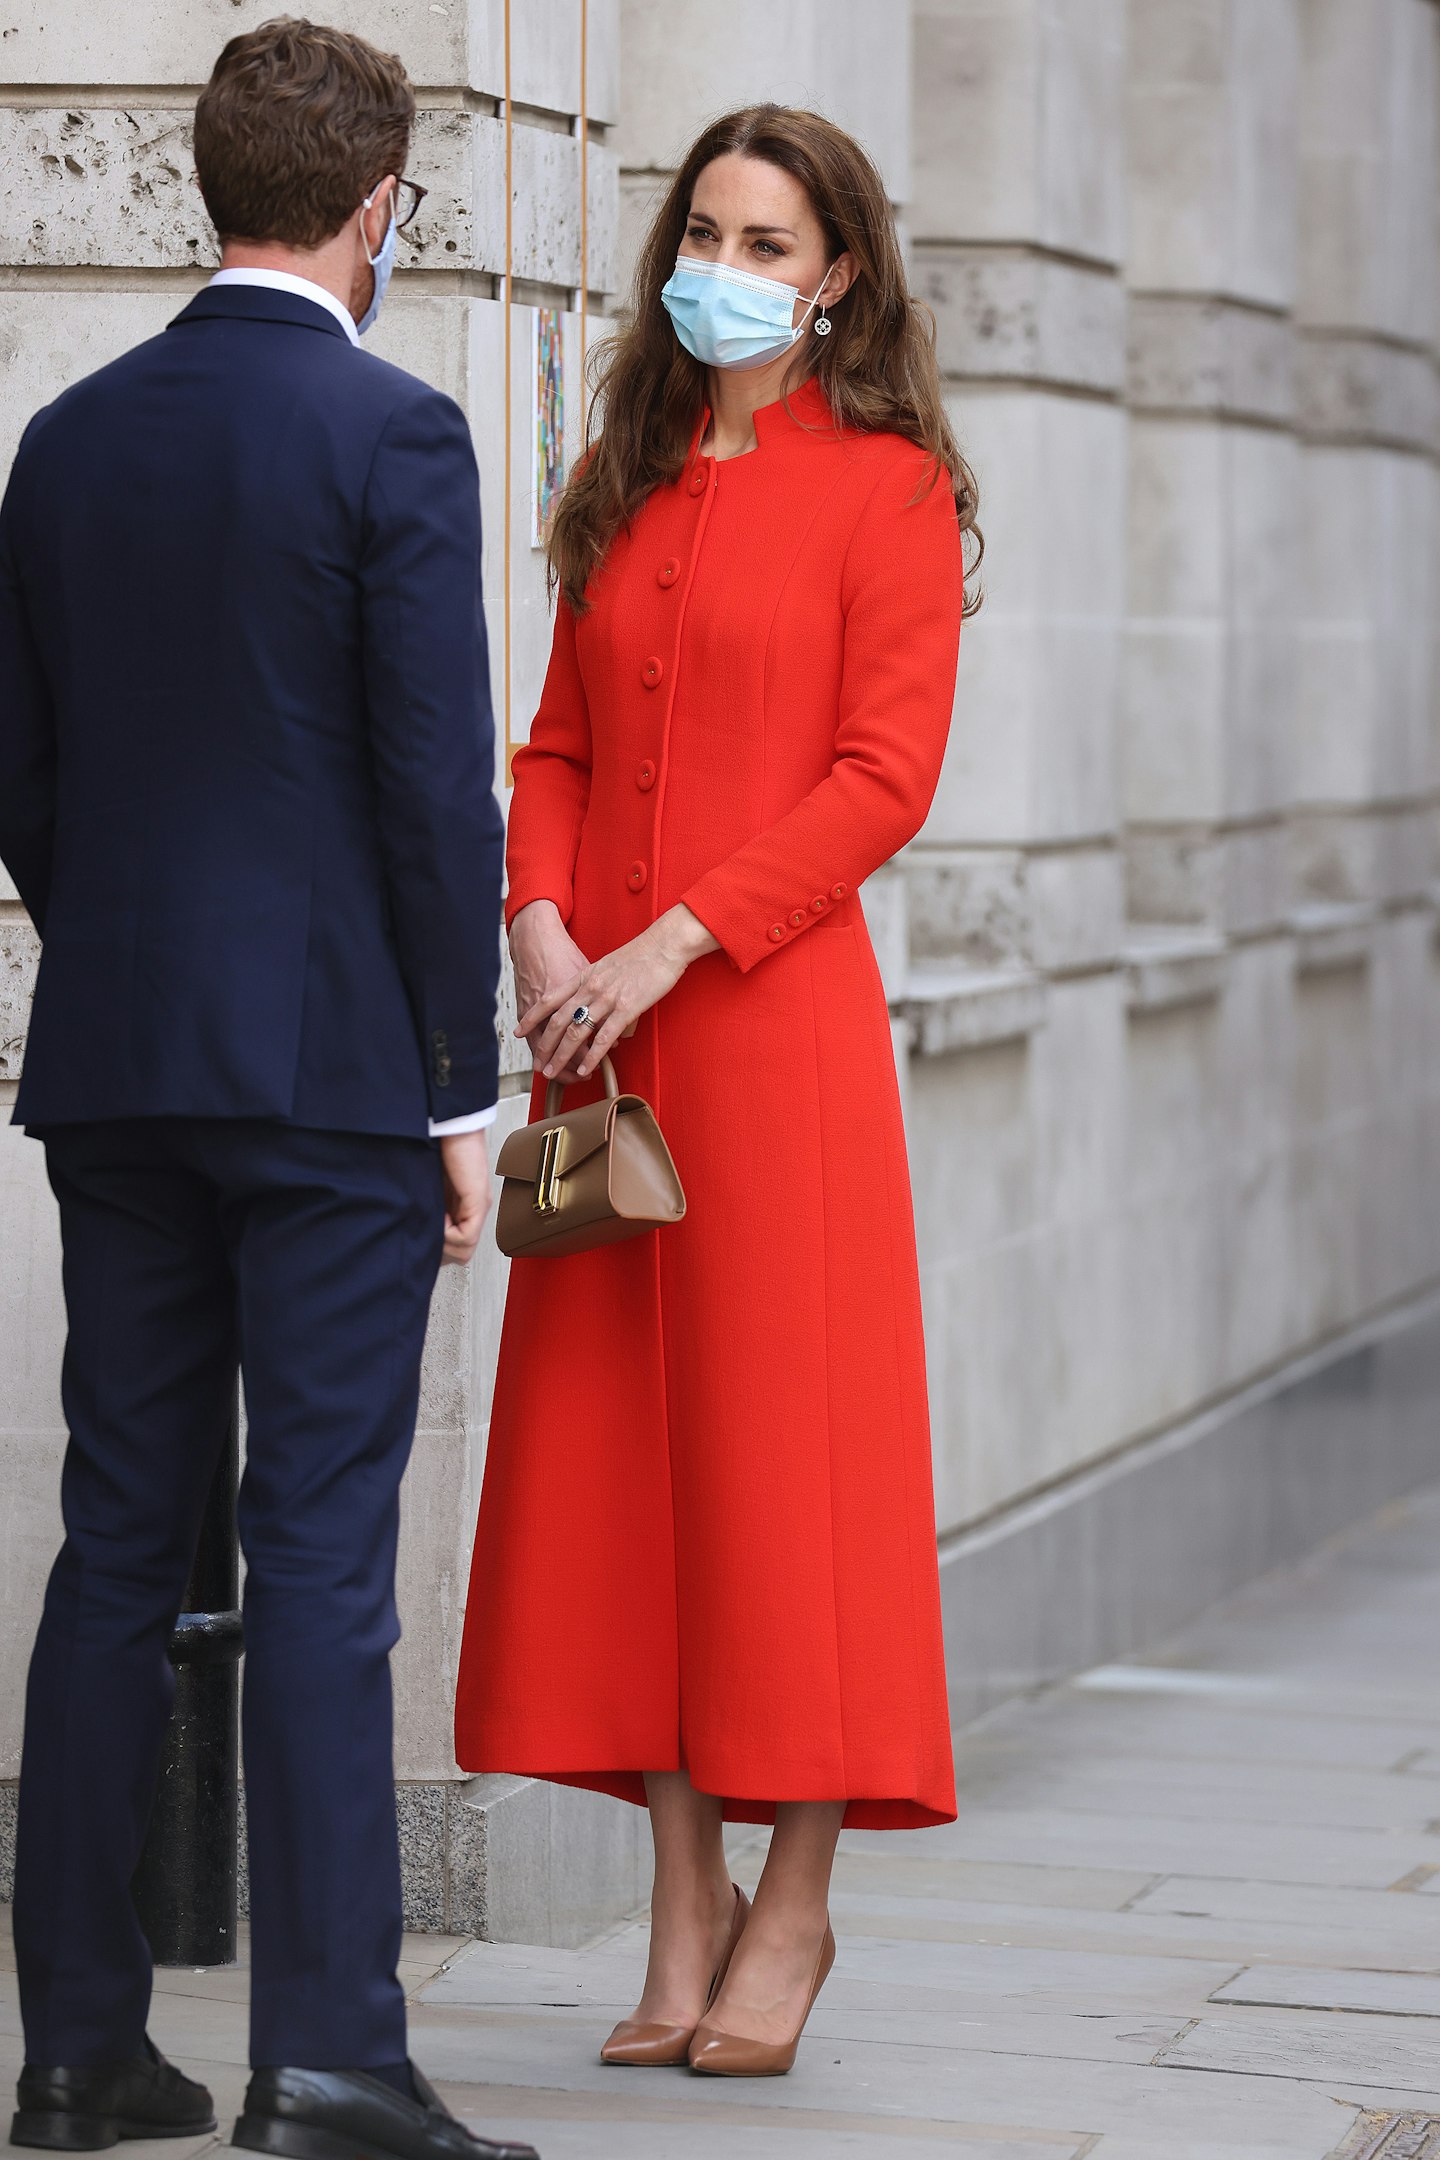 Kate Middleton wearing a scarlet, single-breasted coat from Eponine 